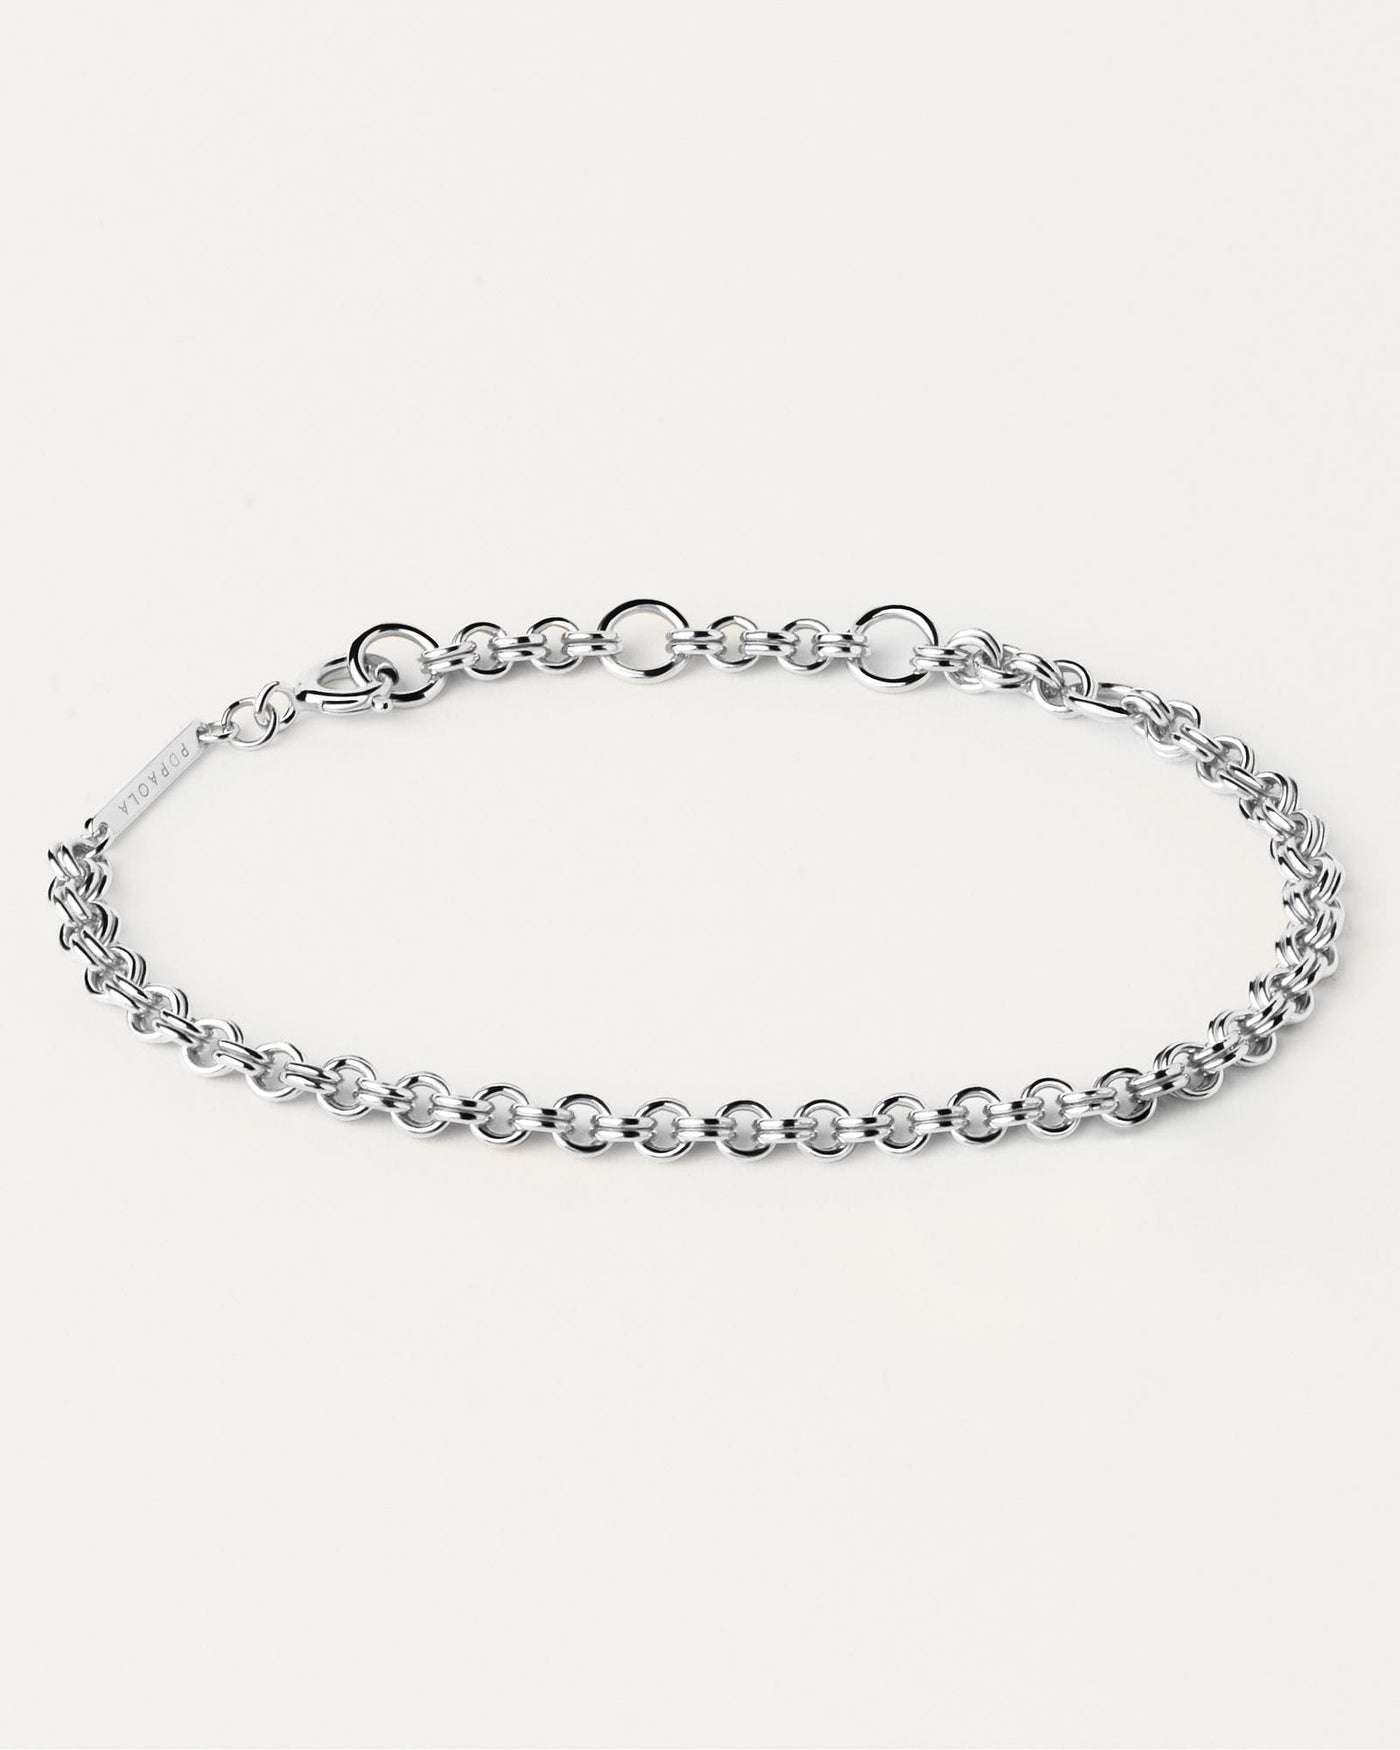 2024 Selection | Neo Silver Bracelet. 925 silver chain bracelet with double cable links. Get the latest arrival from PDPAOLA. Place your order safely and get this Best Seller. Free Shipping.